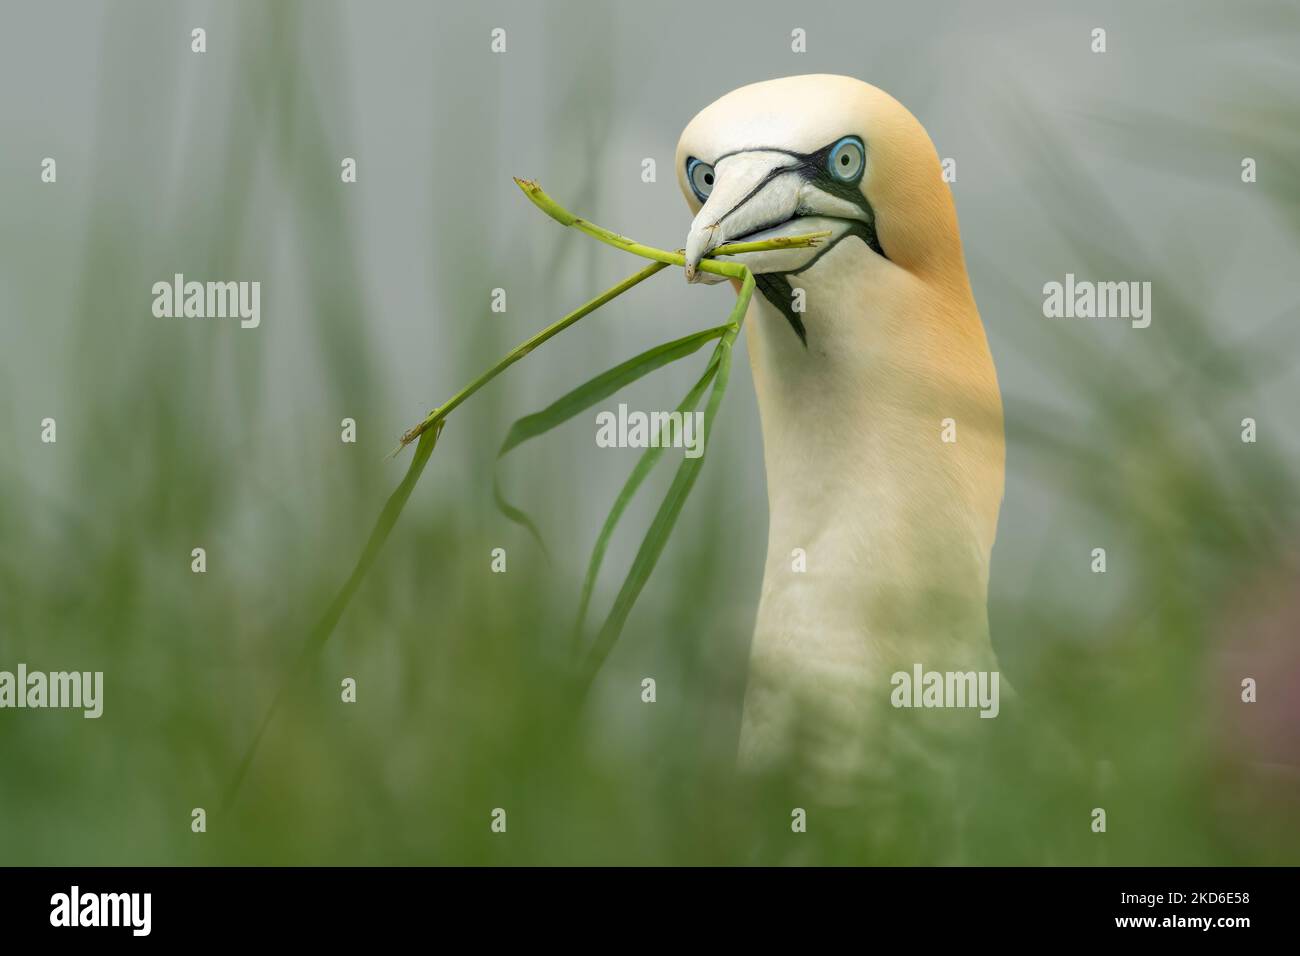 Gannet collects nesting material in its beak, Bempton Cliffs, Yorkshire Stock Photo